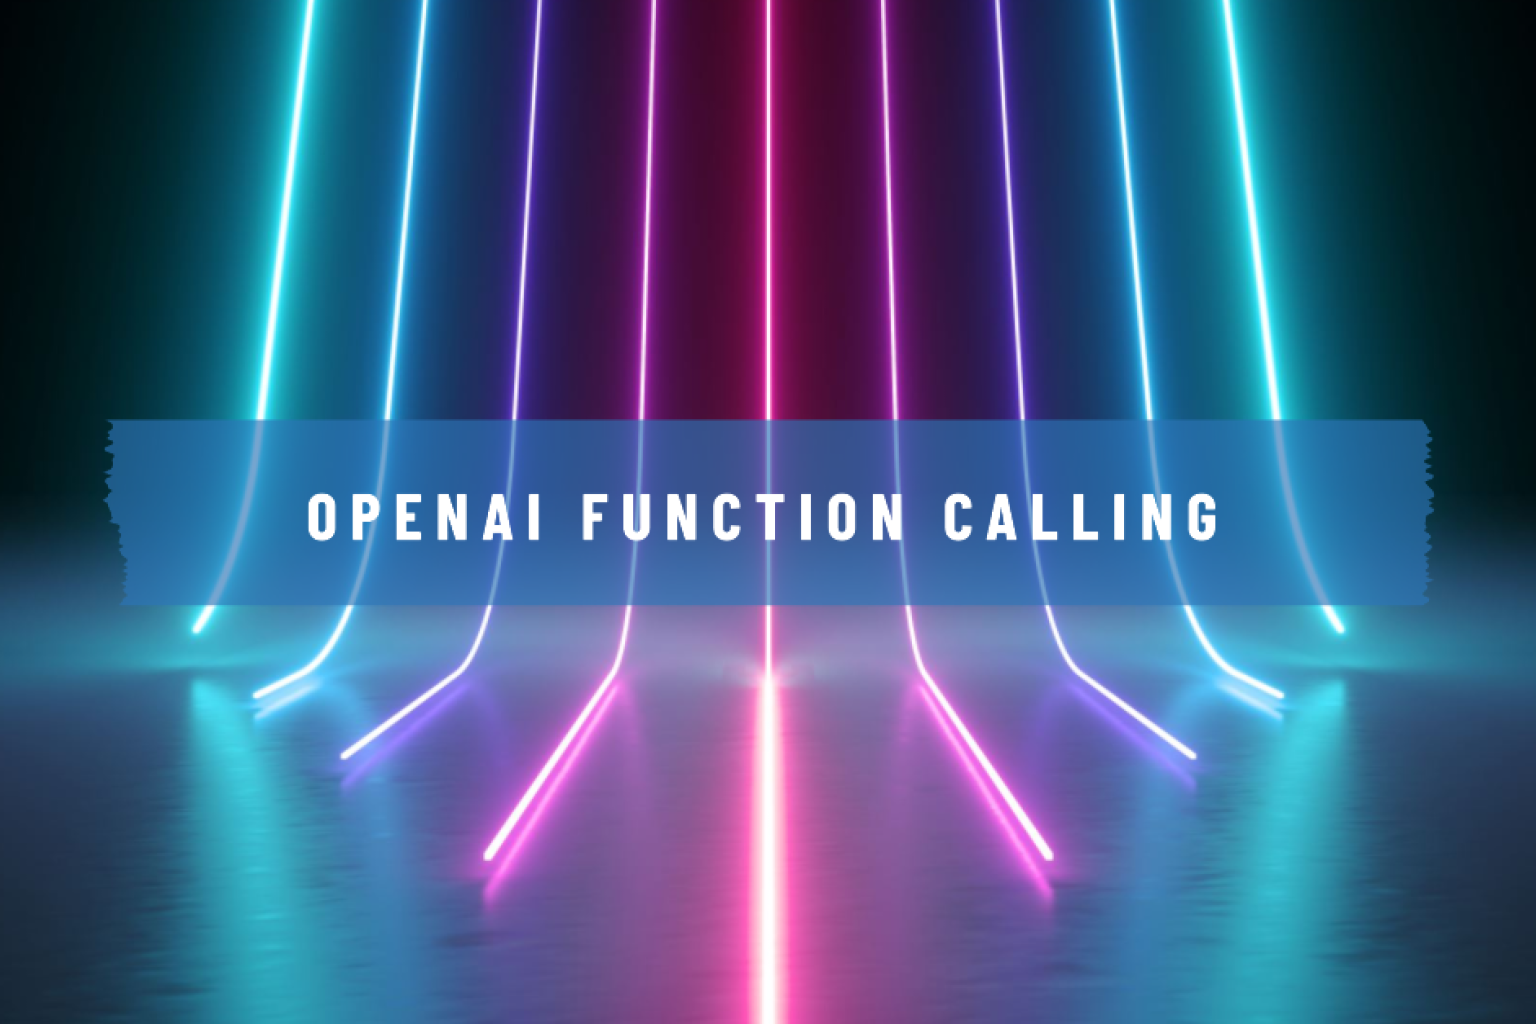 Dive into the world of OpenAI function calling, understand its potential, and learn how to leverage it for your applications. Explore the future of AI with us.